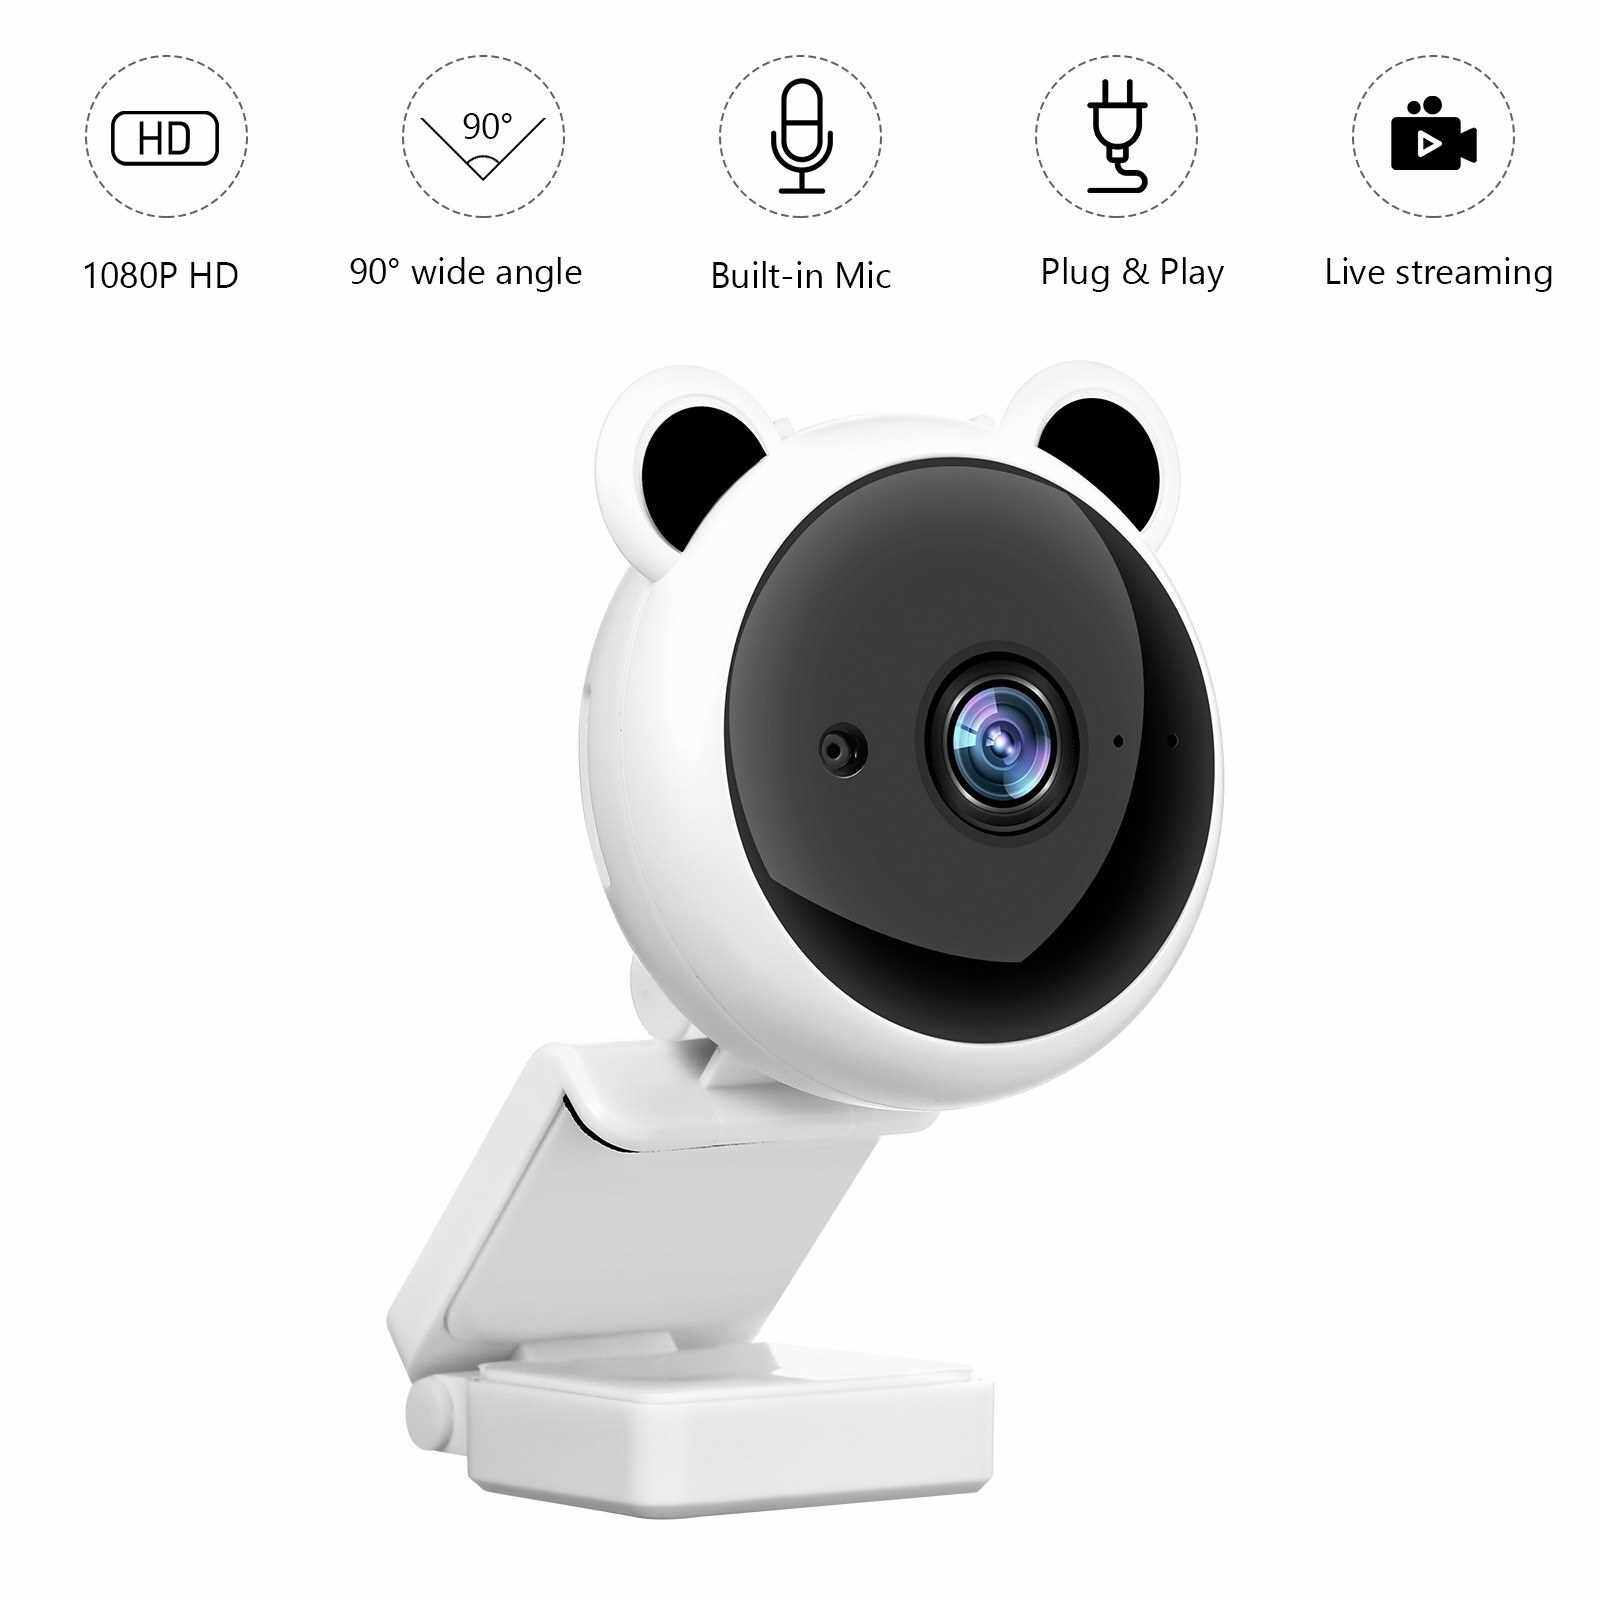 1080P Webcam with Microphone, USB 2.0 Desktop Laptop Computer USB Camera Plug and Play, for Video Streaming, Conference, Gaming, Online Teaching (Pink)